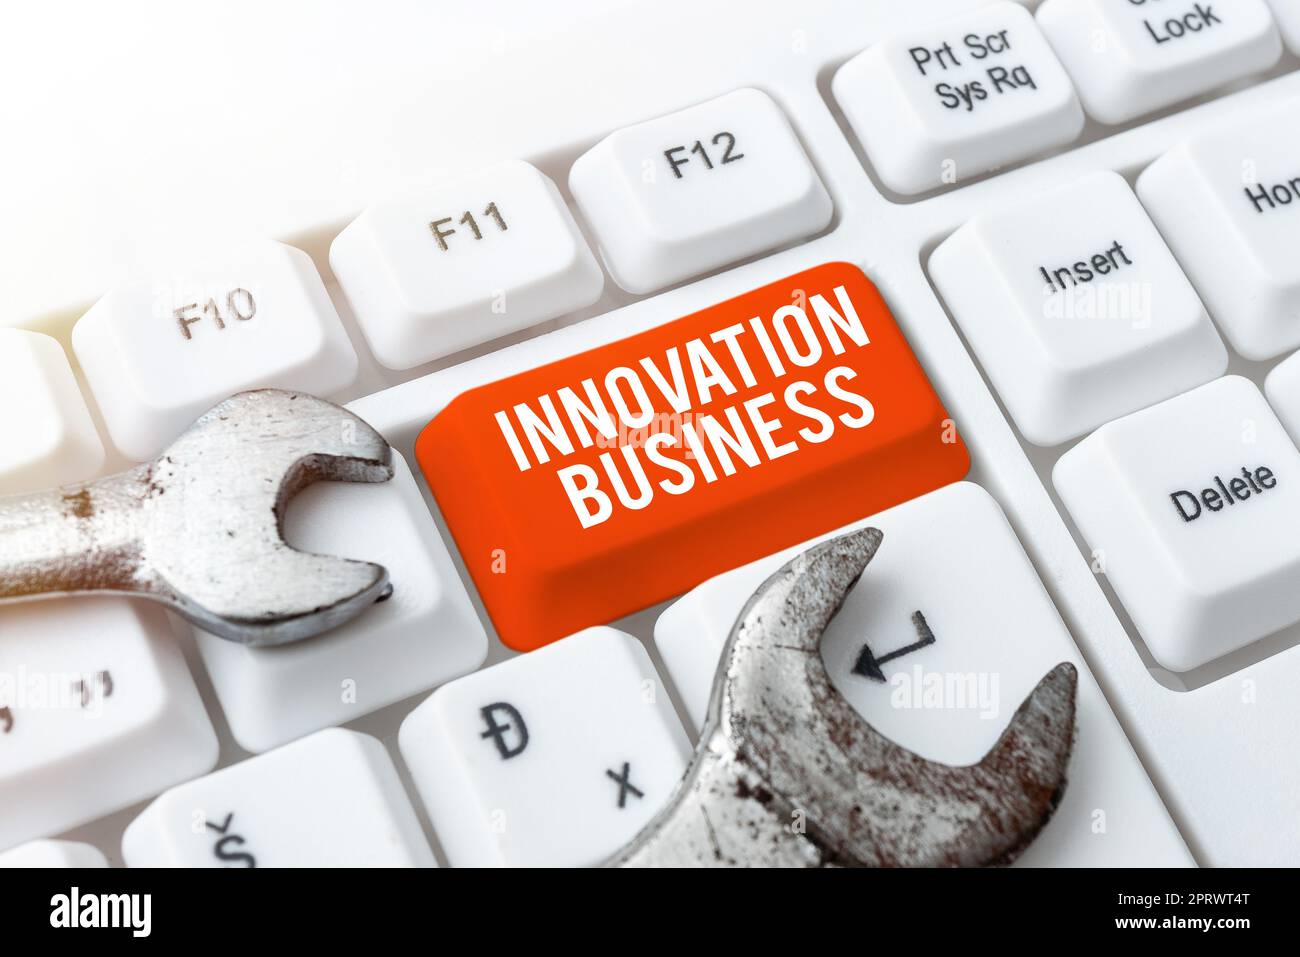 Writing displaying text Innovation Business. Business concept Introduce New Ideas Workflows Methodology Services Stock Photo